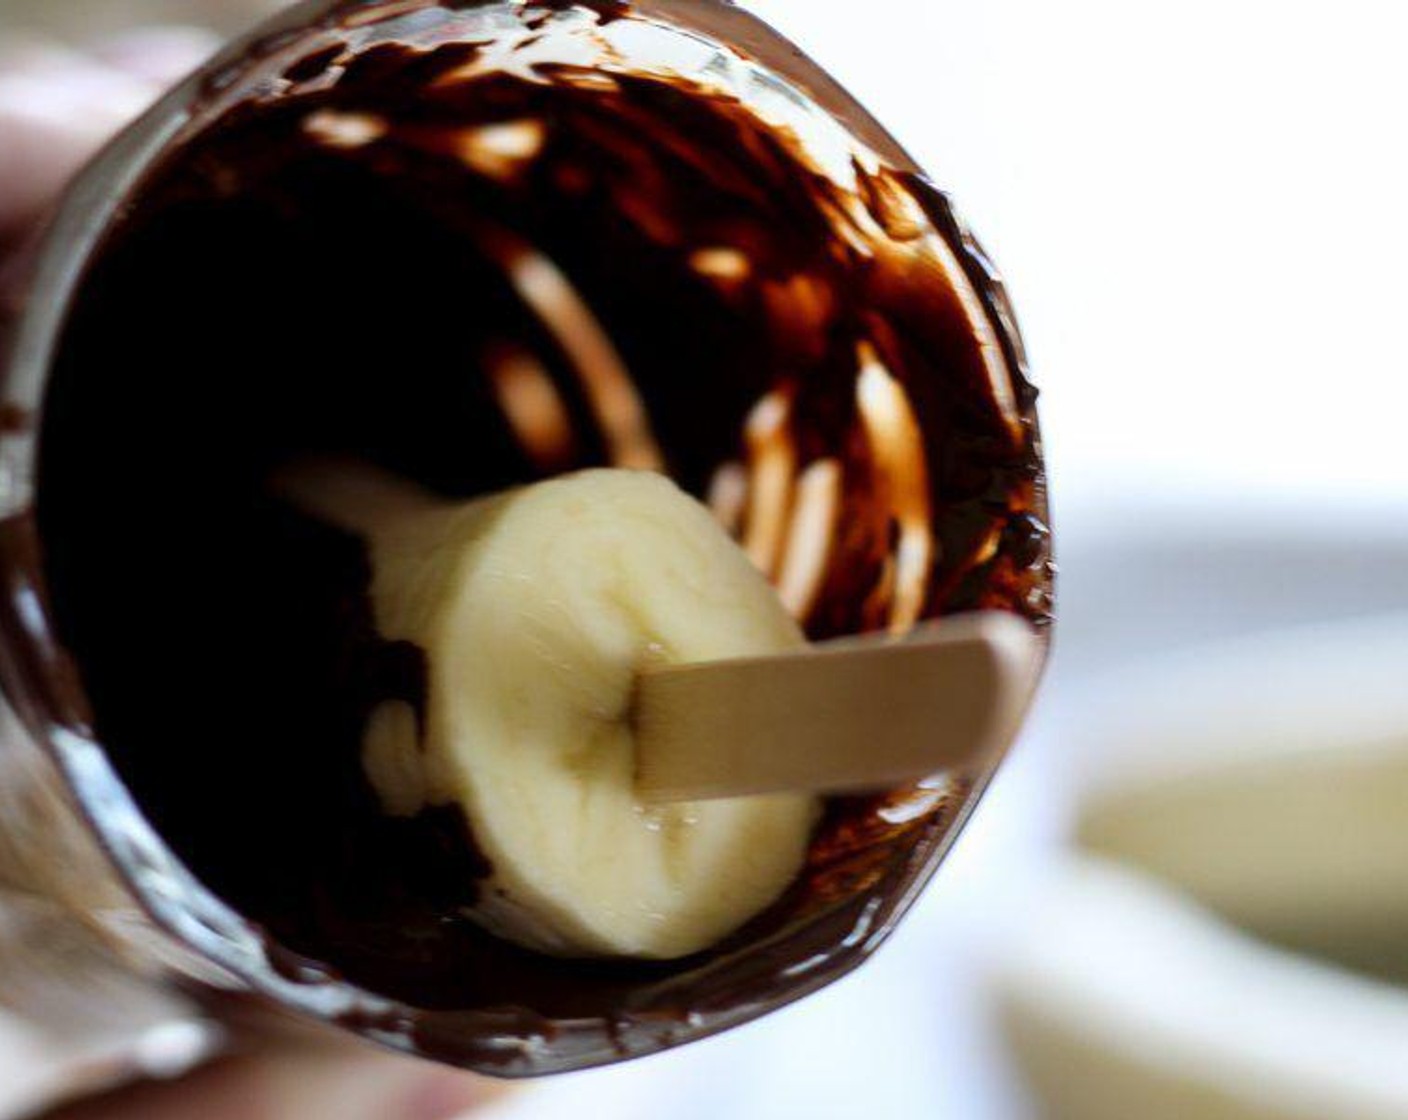 step 4 Tilt the glass toward you, and carefully roll and twist the banana pop until it is evenly covered in dark chocolate.